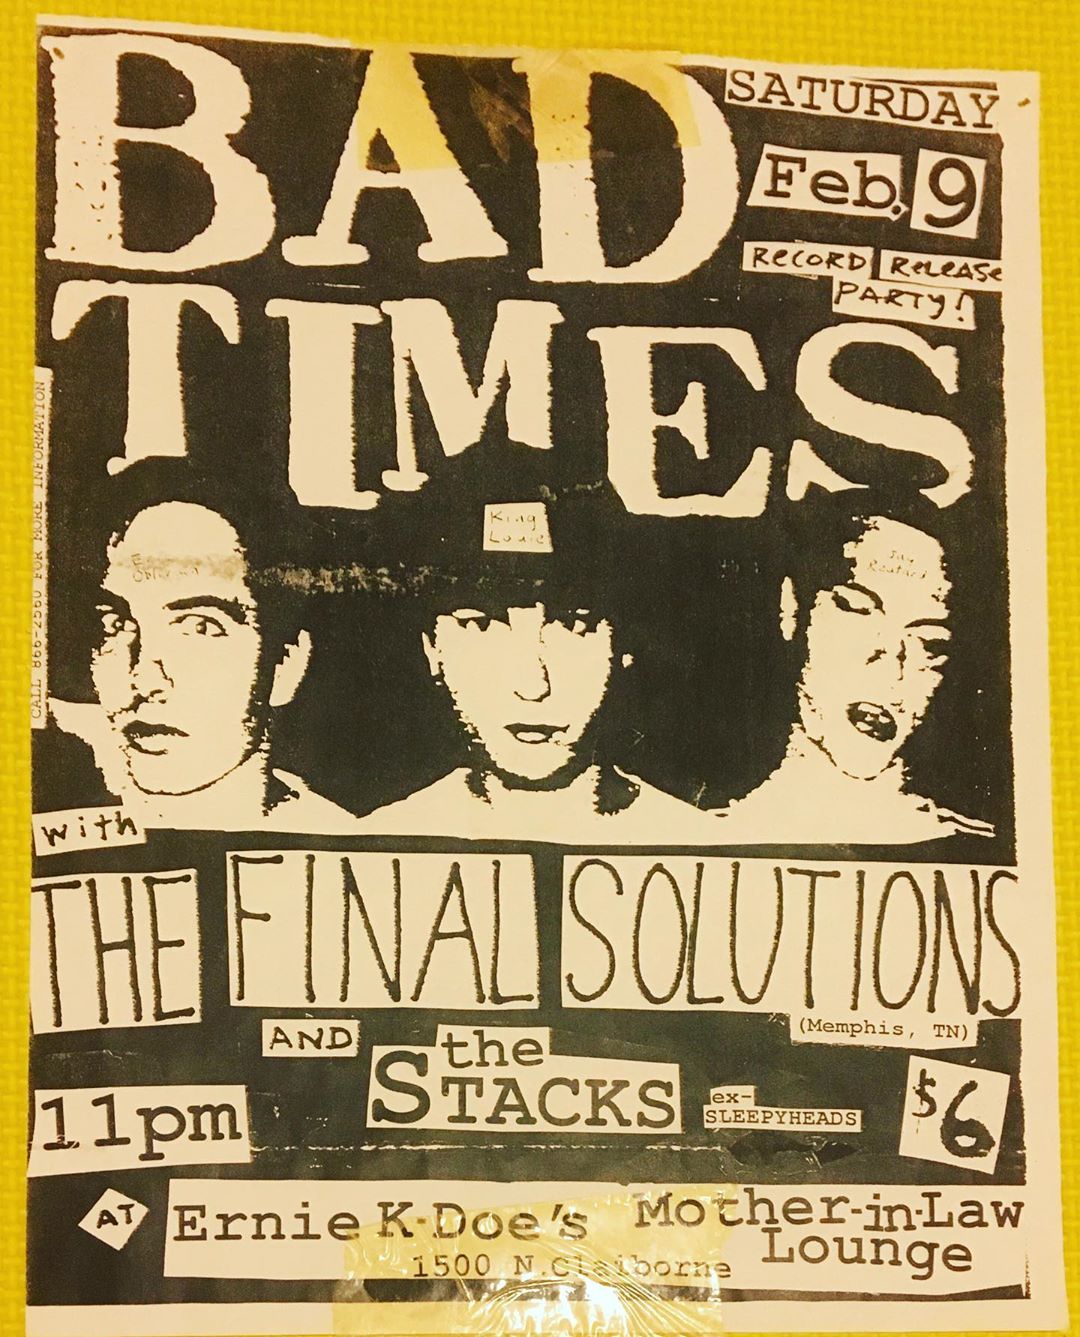 Flyer for Stacks and Bad Times at Mother-In-Law Lounge, February 9, 2001.